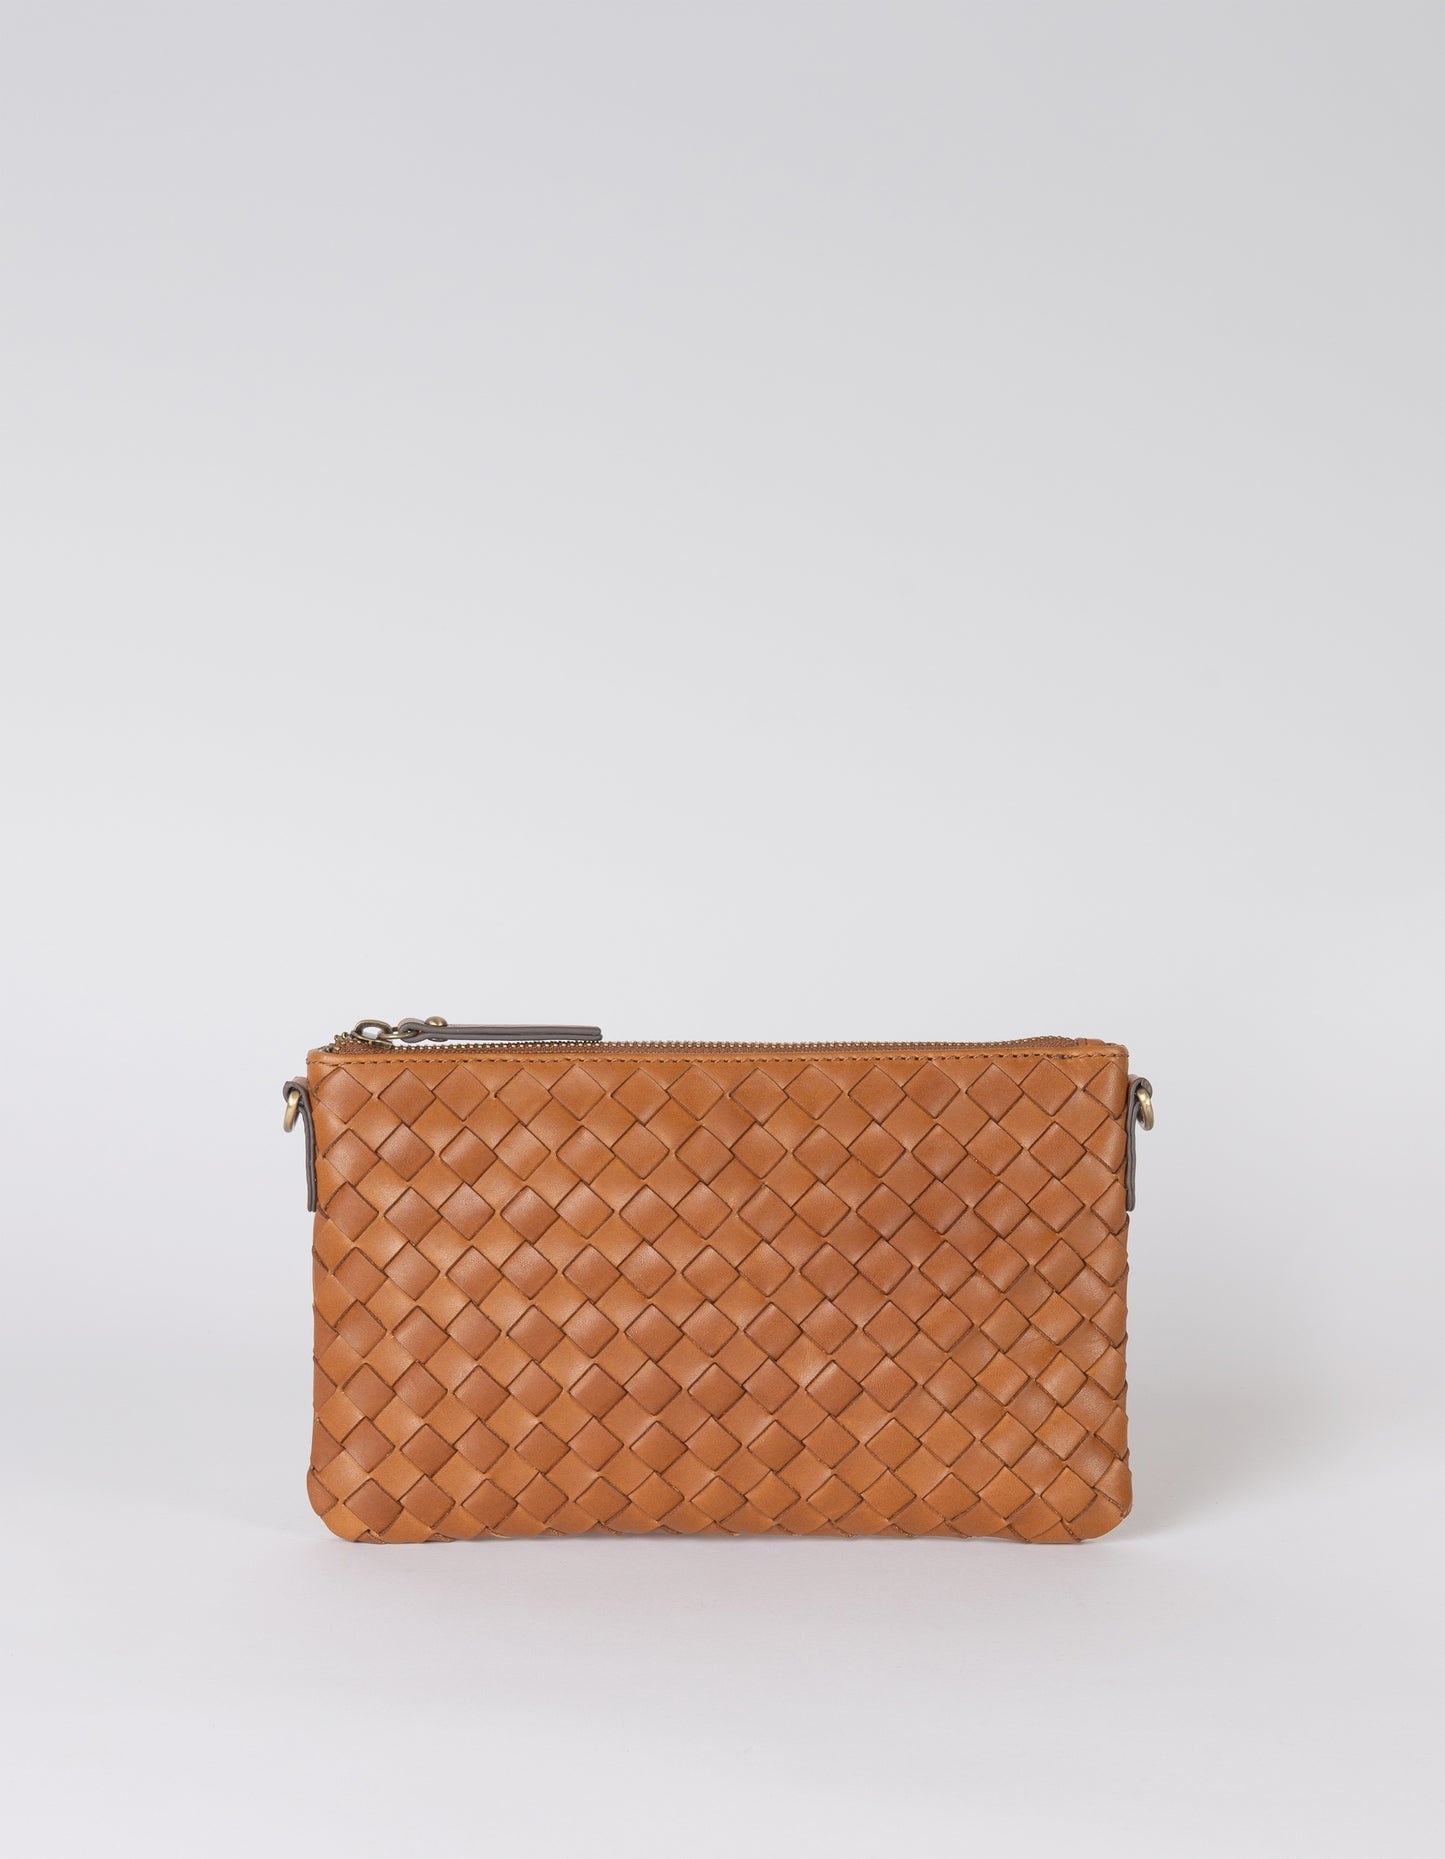 O MY BAG - Lexi Cognac woven classic leather